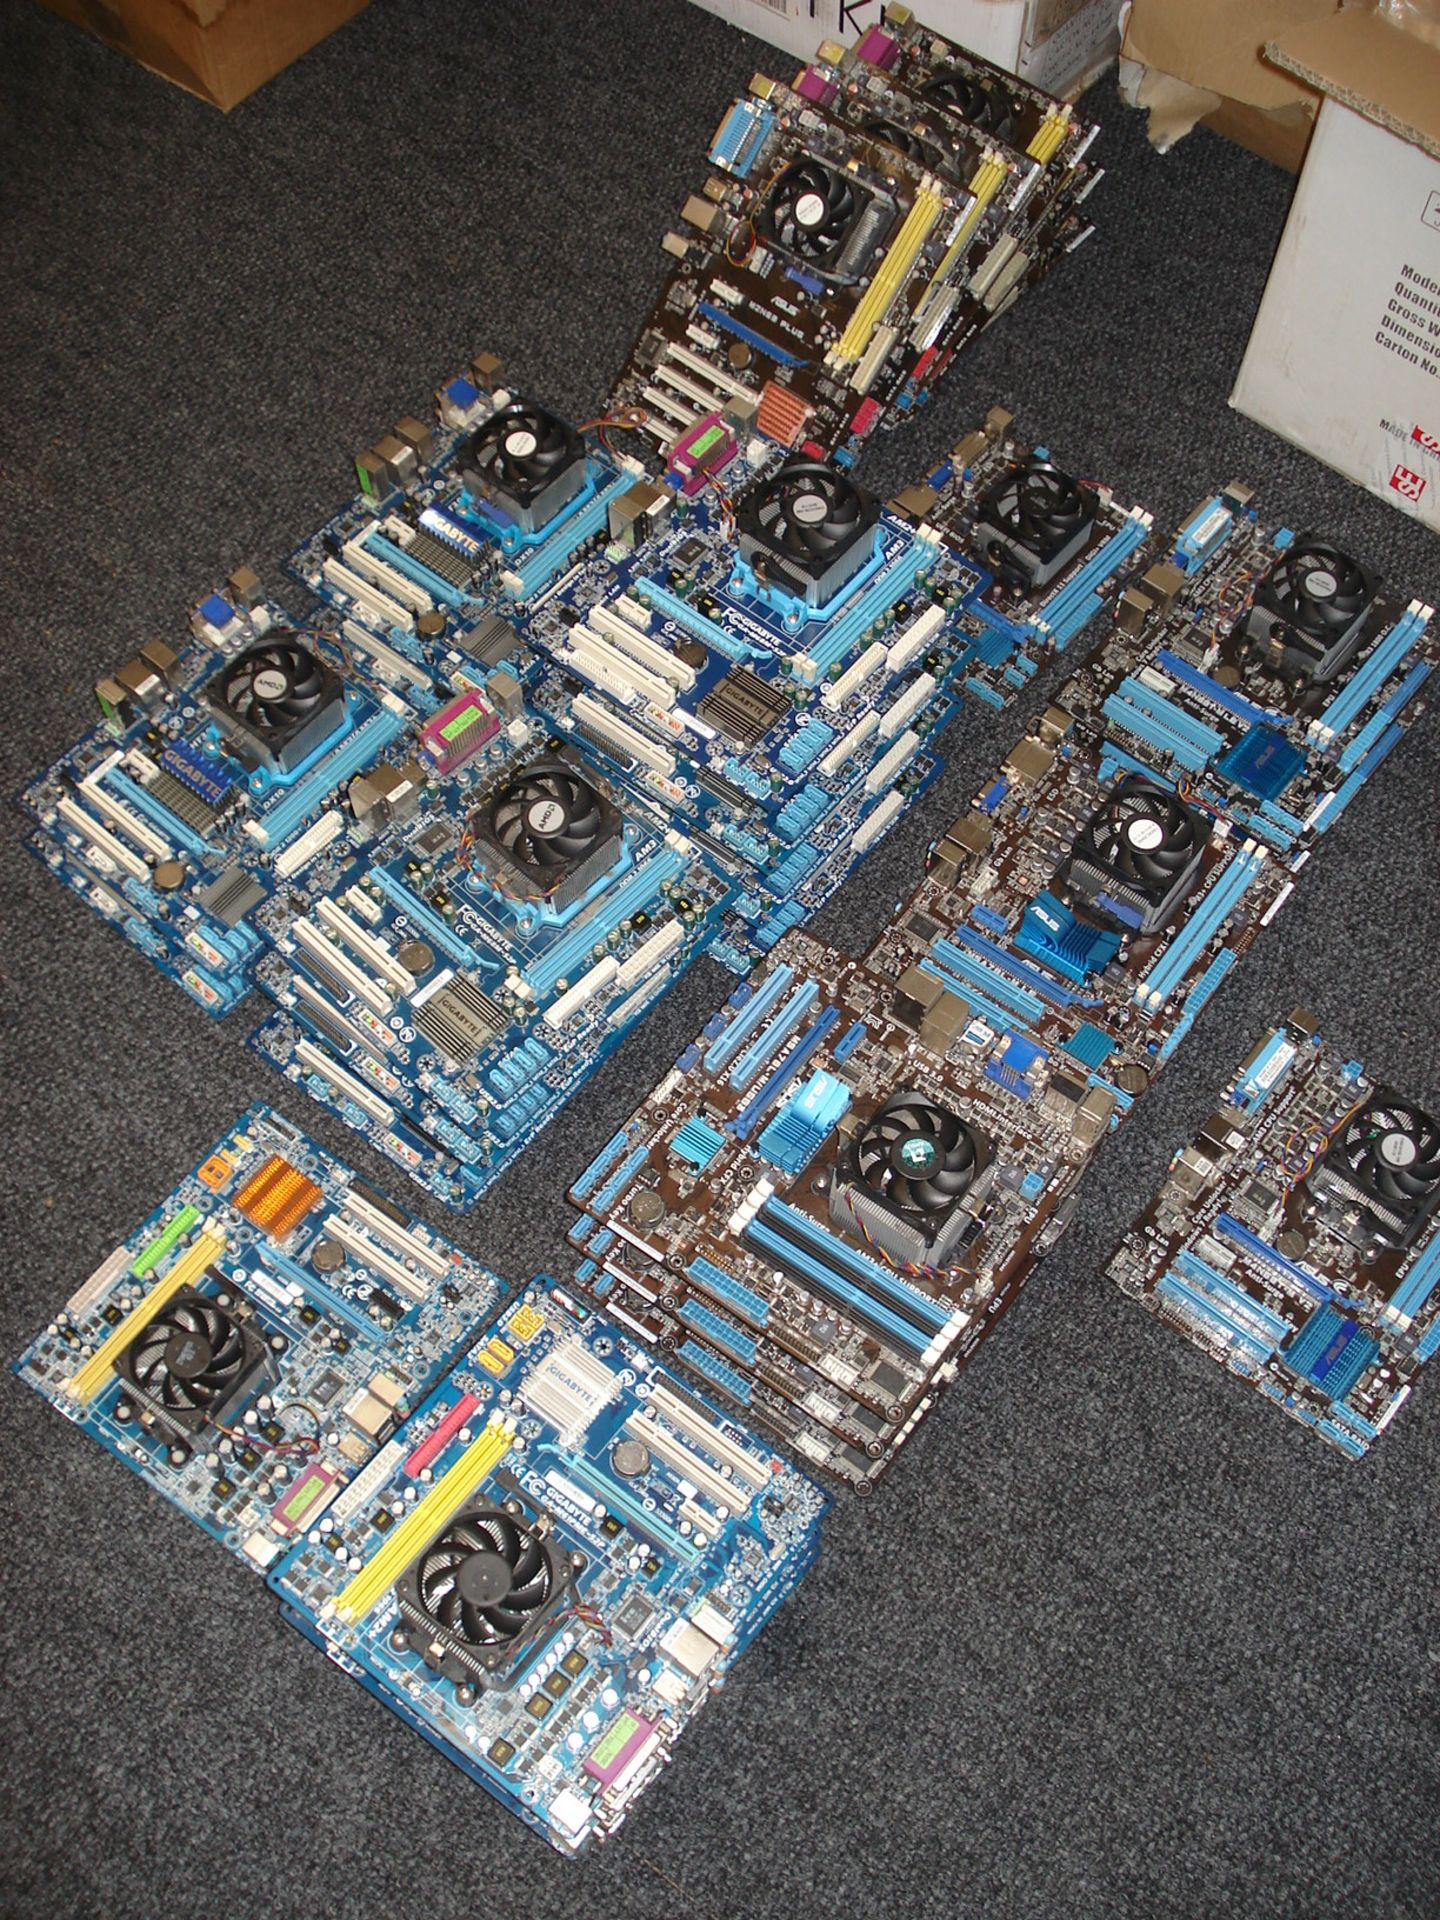 ASUS Boards - M4N68T-M LE V2 - QTY 2, M4N68T-M V2 - QTY 1, M5A7BL-M LE QTY 2, AM3 + CPU SUPPORT - - Image 2 of 12